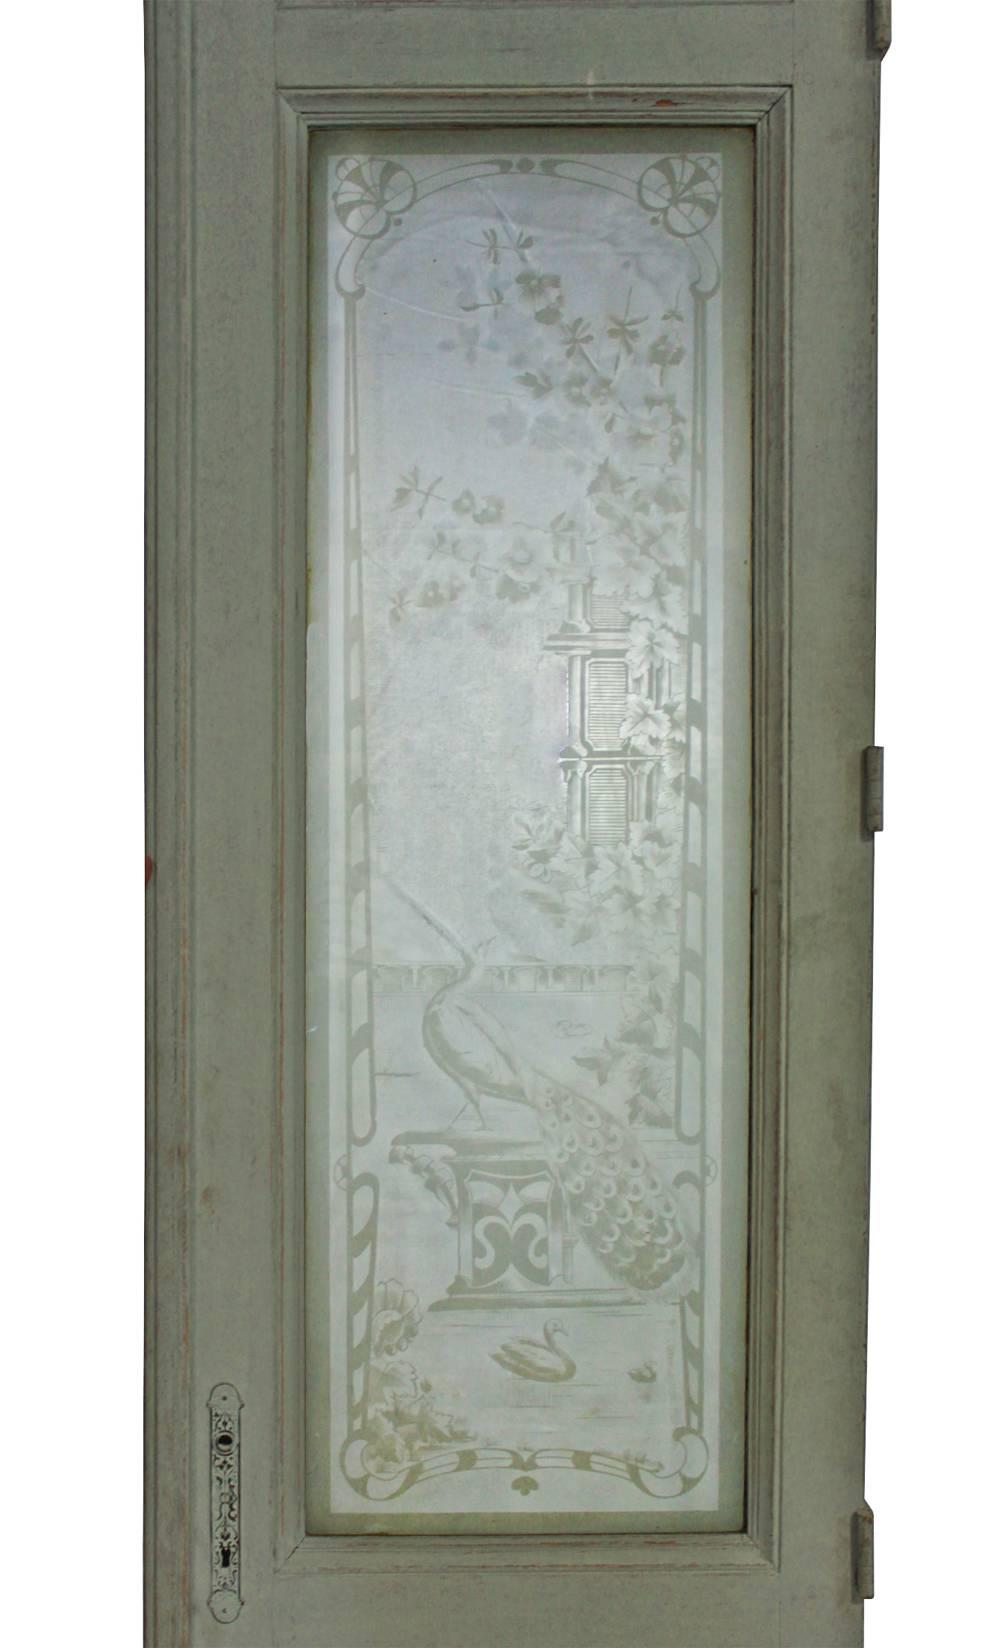 A set of four stunning partition doors in the style of the Aesthetic movement. Each etched glass pane features one of two different scenes of fantasy architecture with birds and vegetation. Each door also has 2 recessed panels and an etched transom